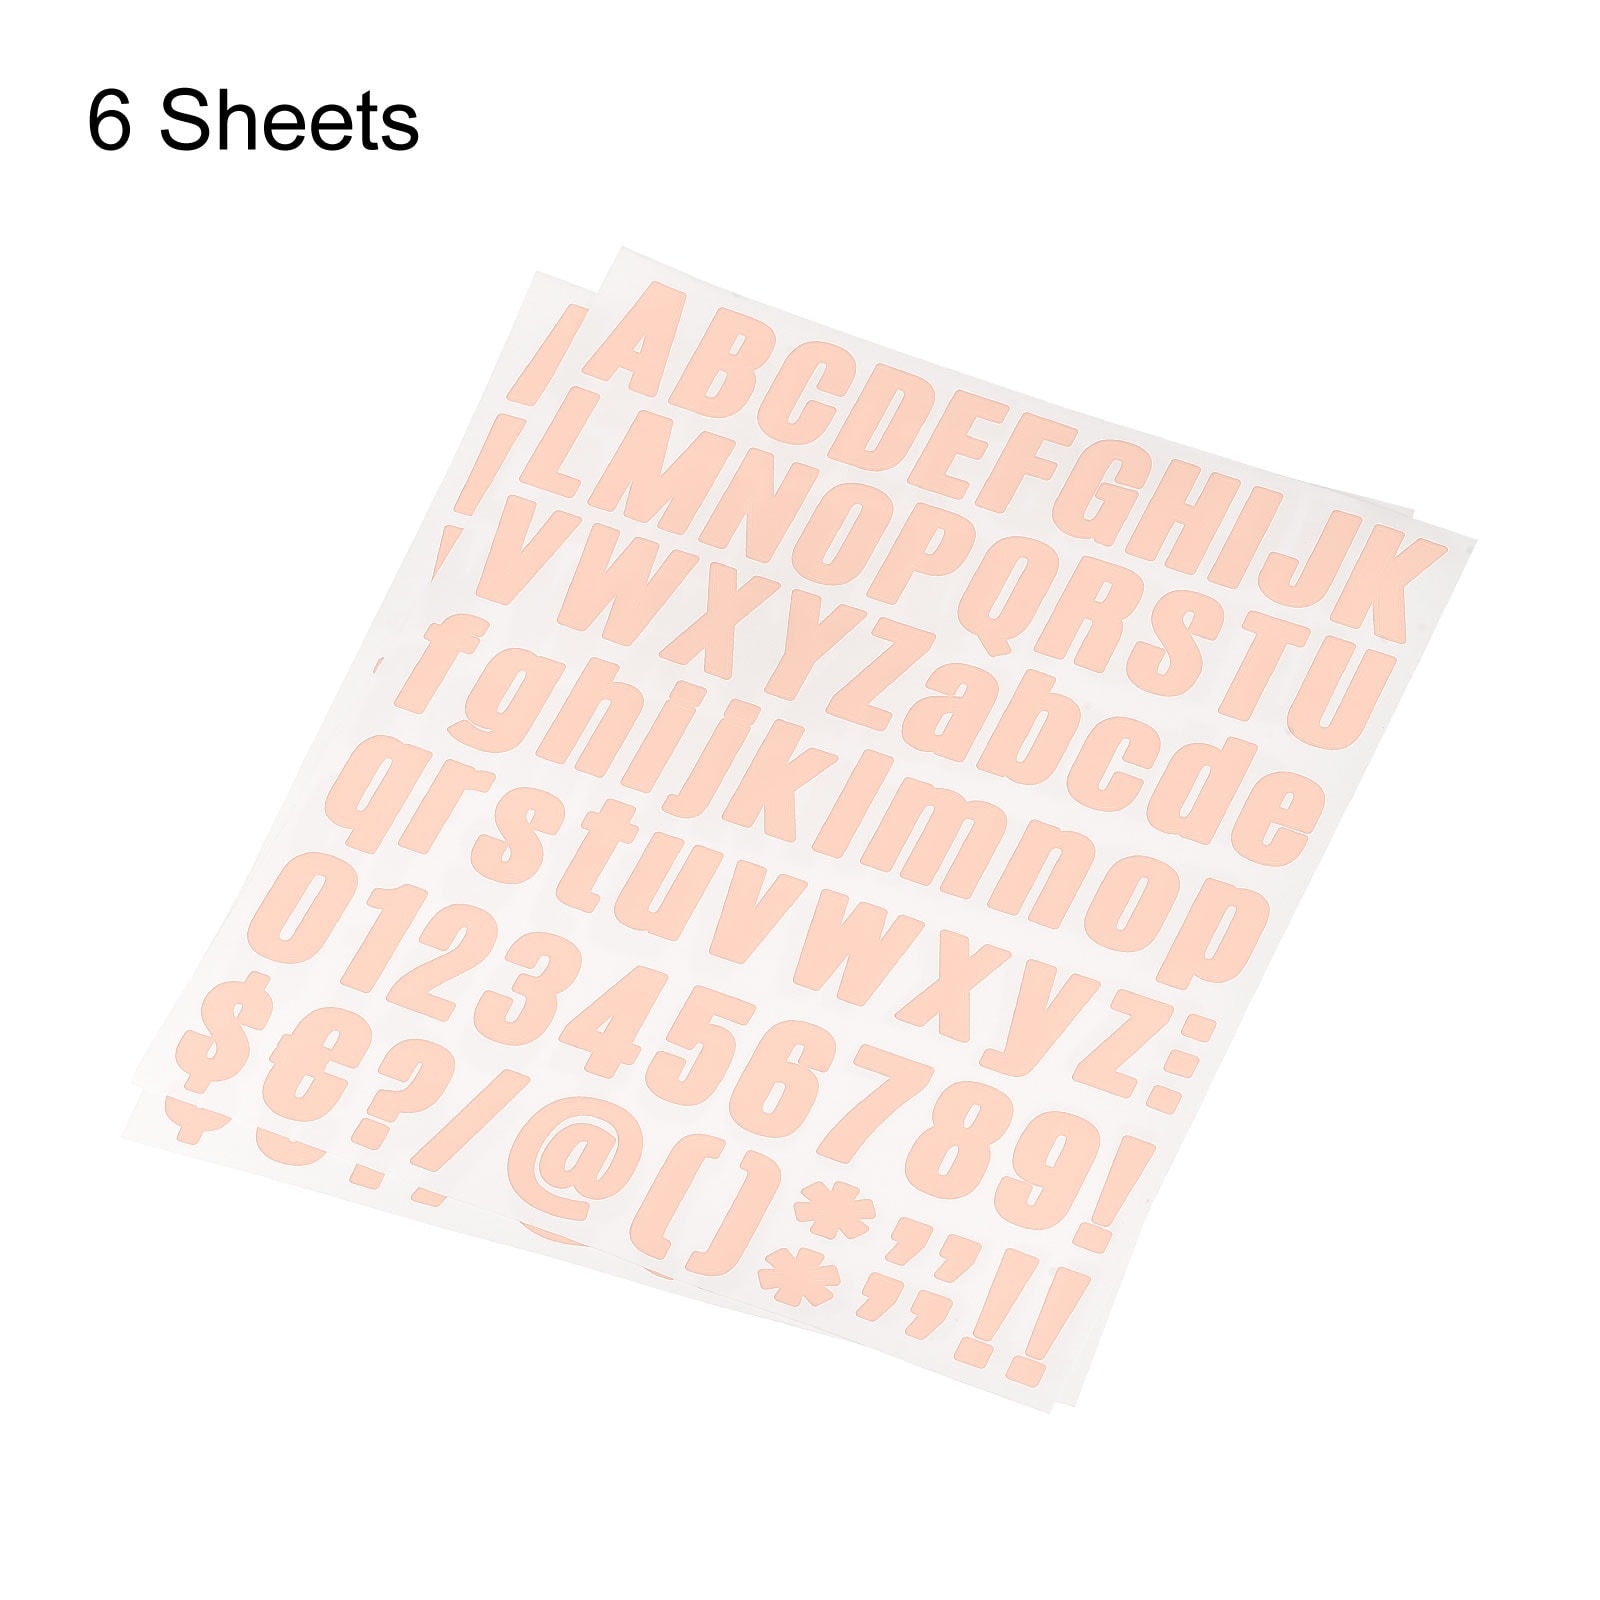 1 inch Self Adhesive Waterproof Vinyl Letter Number Stickers 6 Sheet Light Pink - Light Pink